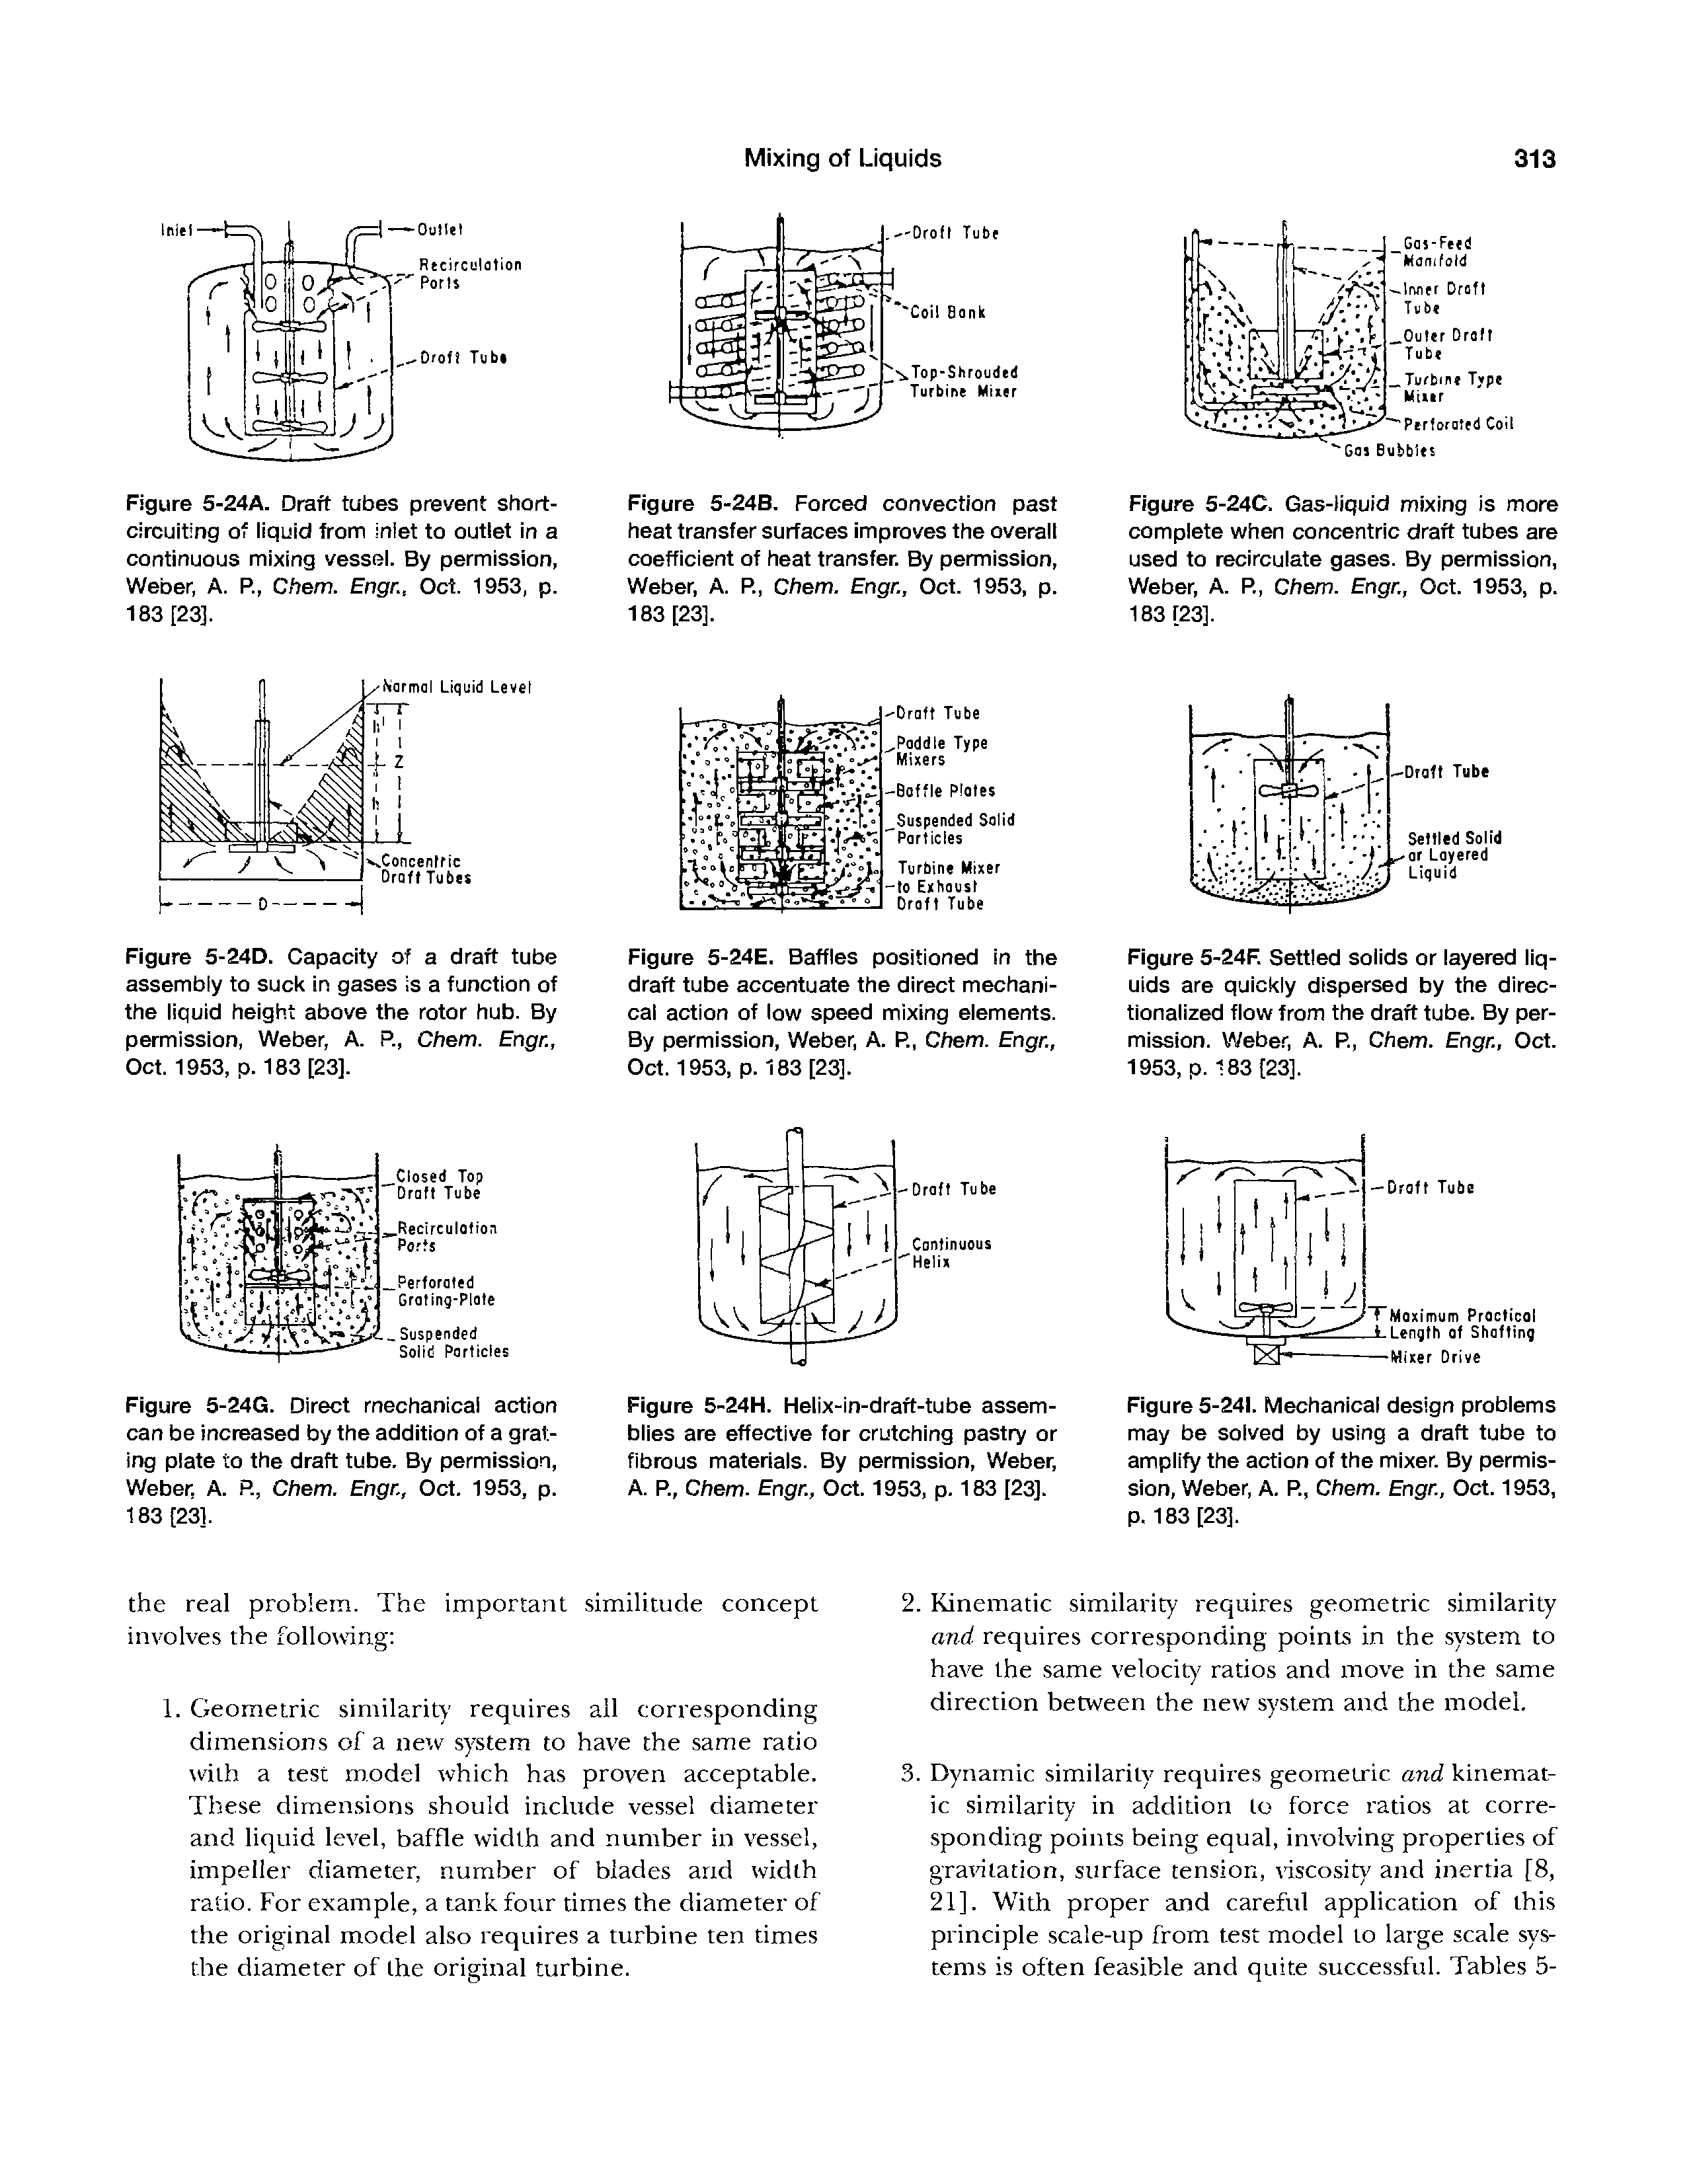 Figure 5-24E. Baffles positioned in the draft tube accentuate the direct mechanical action of low speed mixing elements. By permission, Weber, A. R, Chem. Engr., Oct. 1953, p. 183 [23].